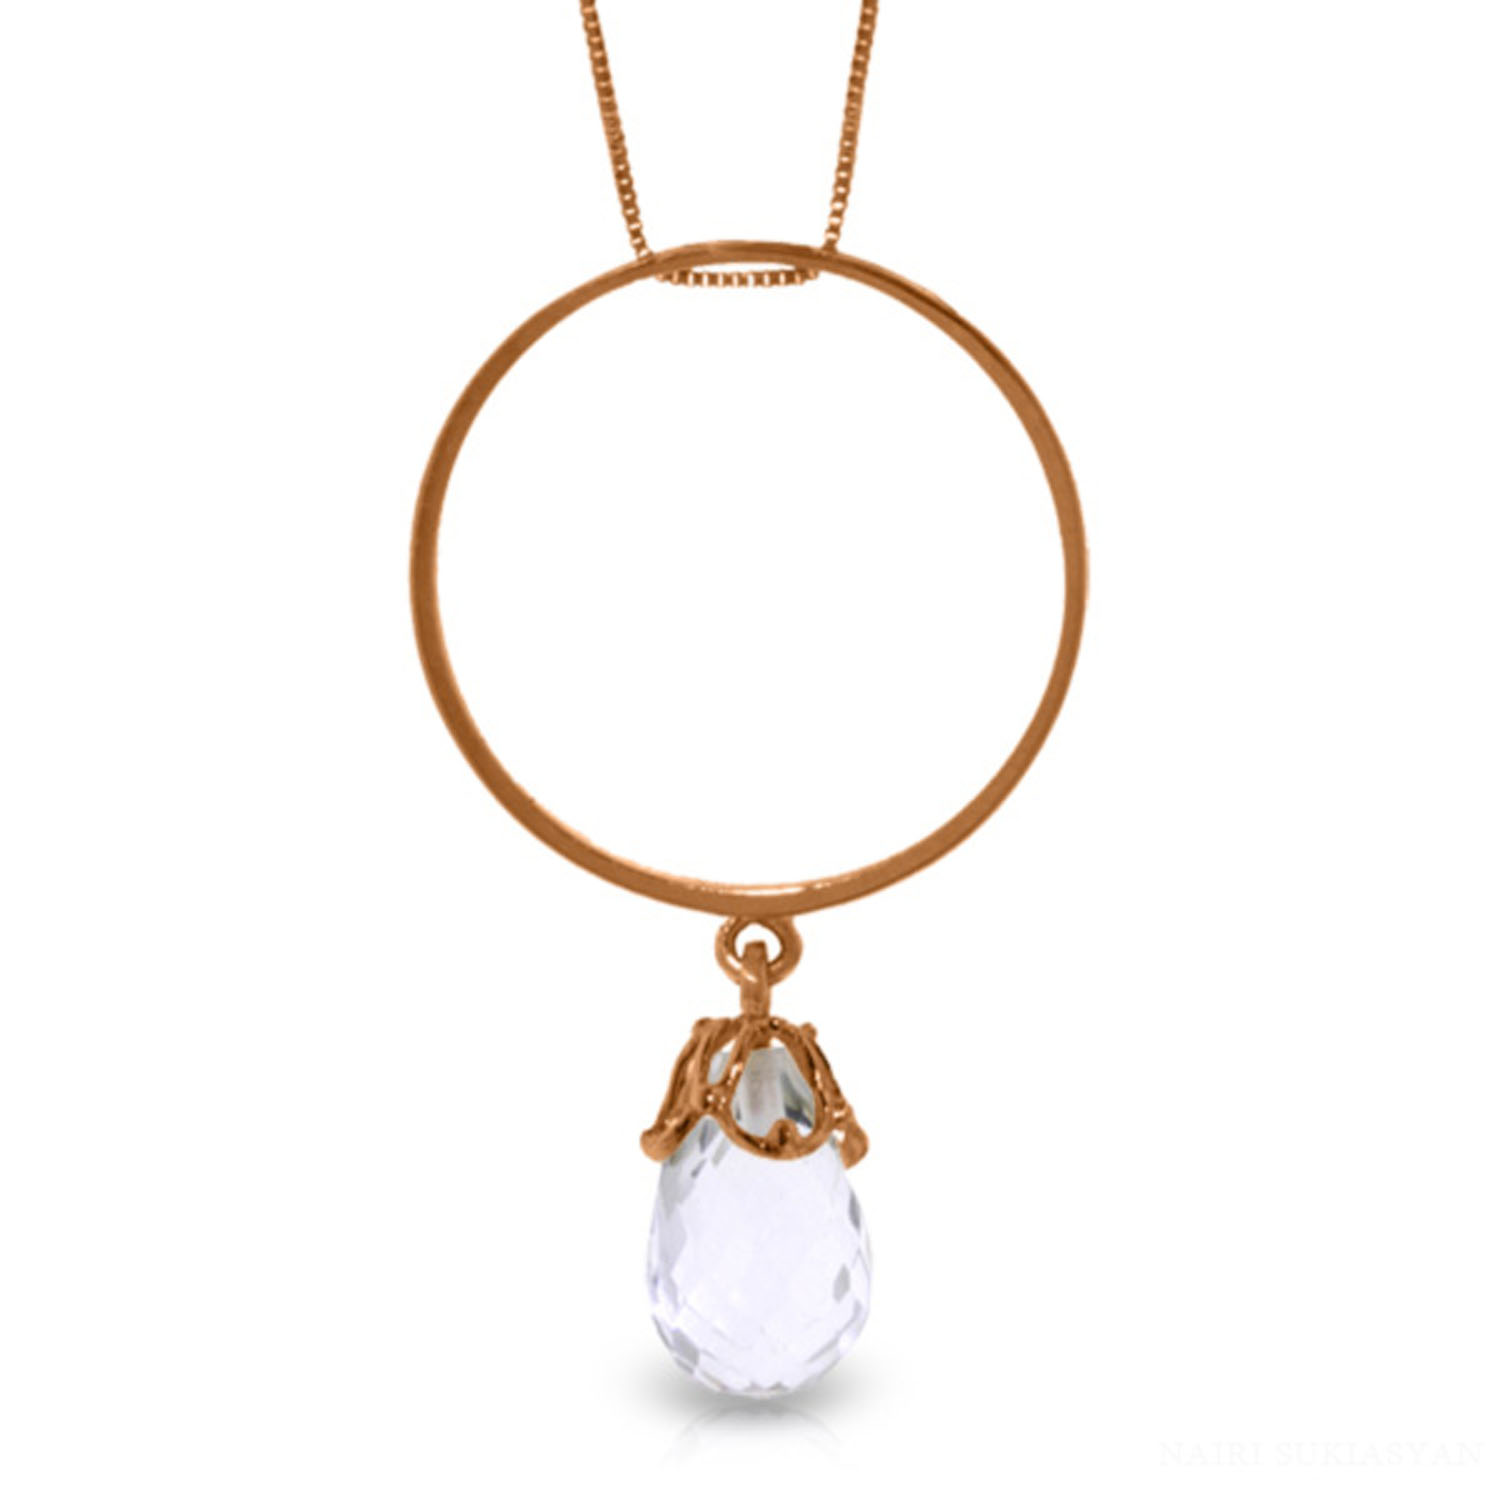 Galaxy Gold 3 Carat 14k 16" Solid Rose Gold Necklace with Natural Rose Topaz Charm Circle Pendant - image 1 of 2